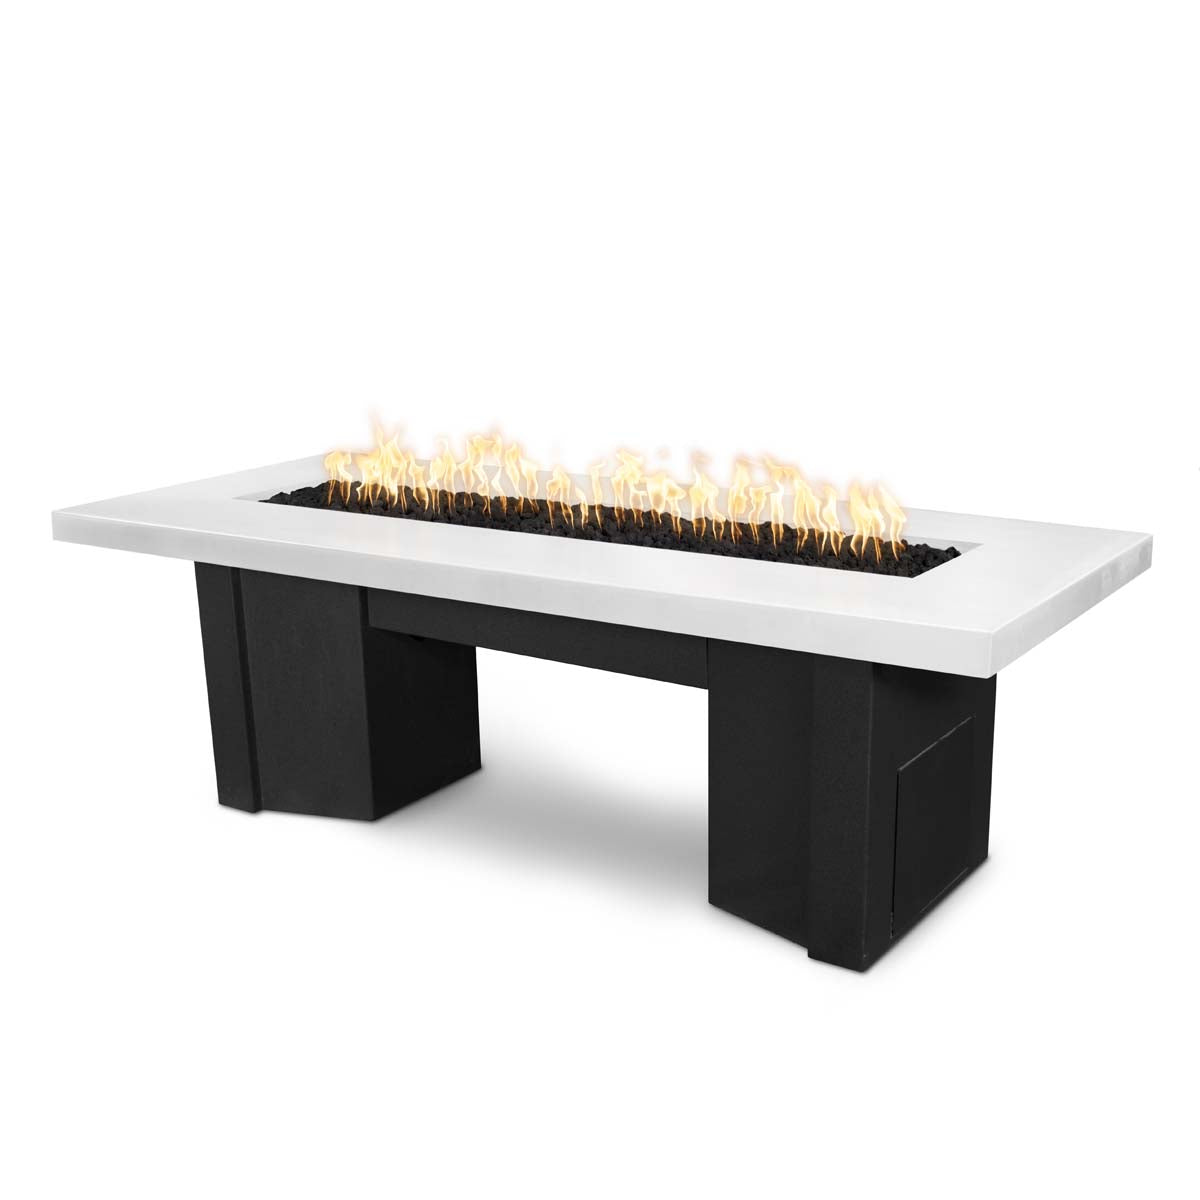 The Outdoor Plus Rectangular Alameda 48" Black & White Powder Coated Liquid Propane Fire Pit with 110V Electronic Ignition